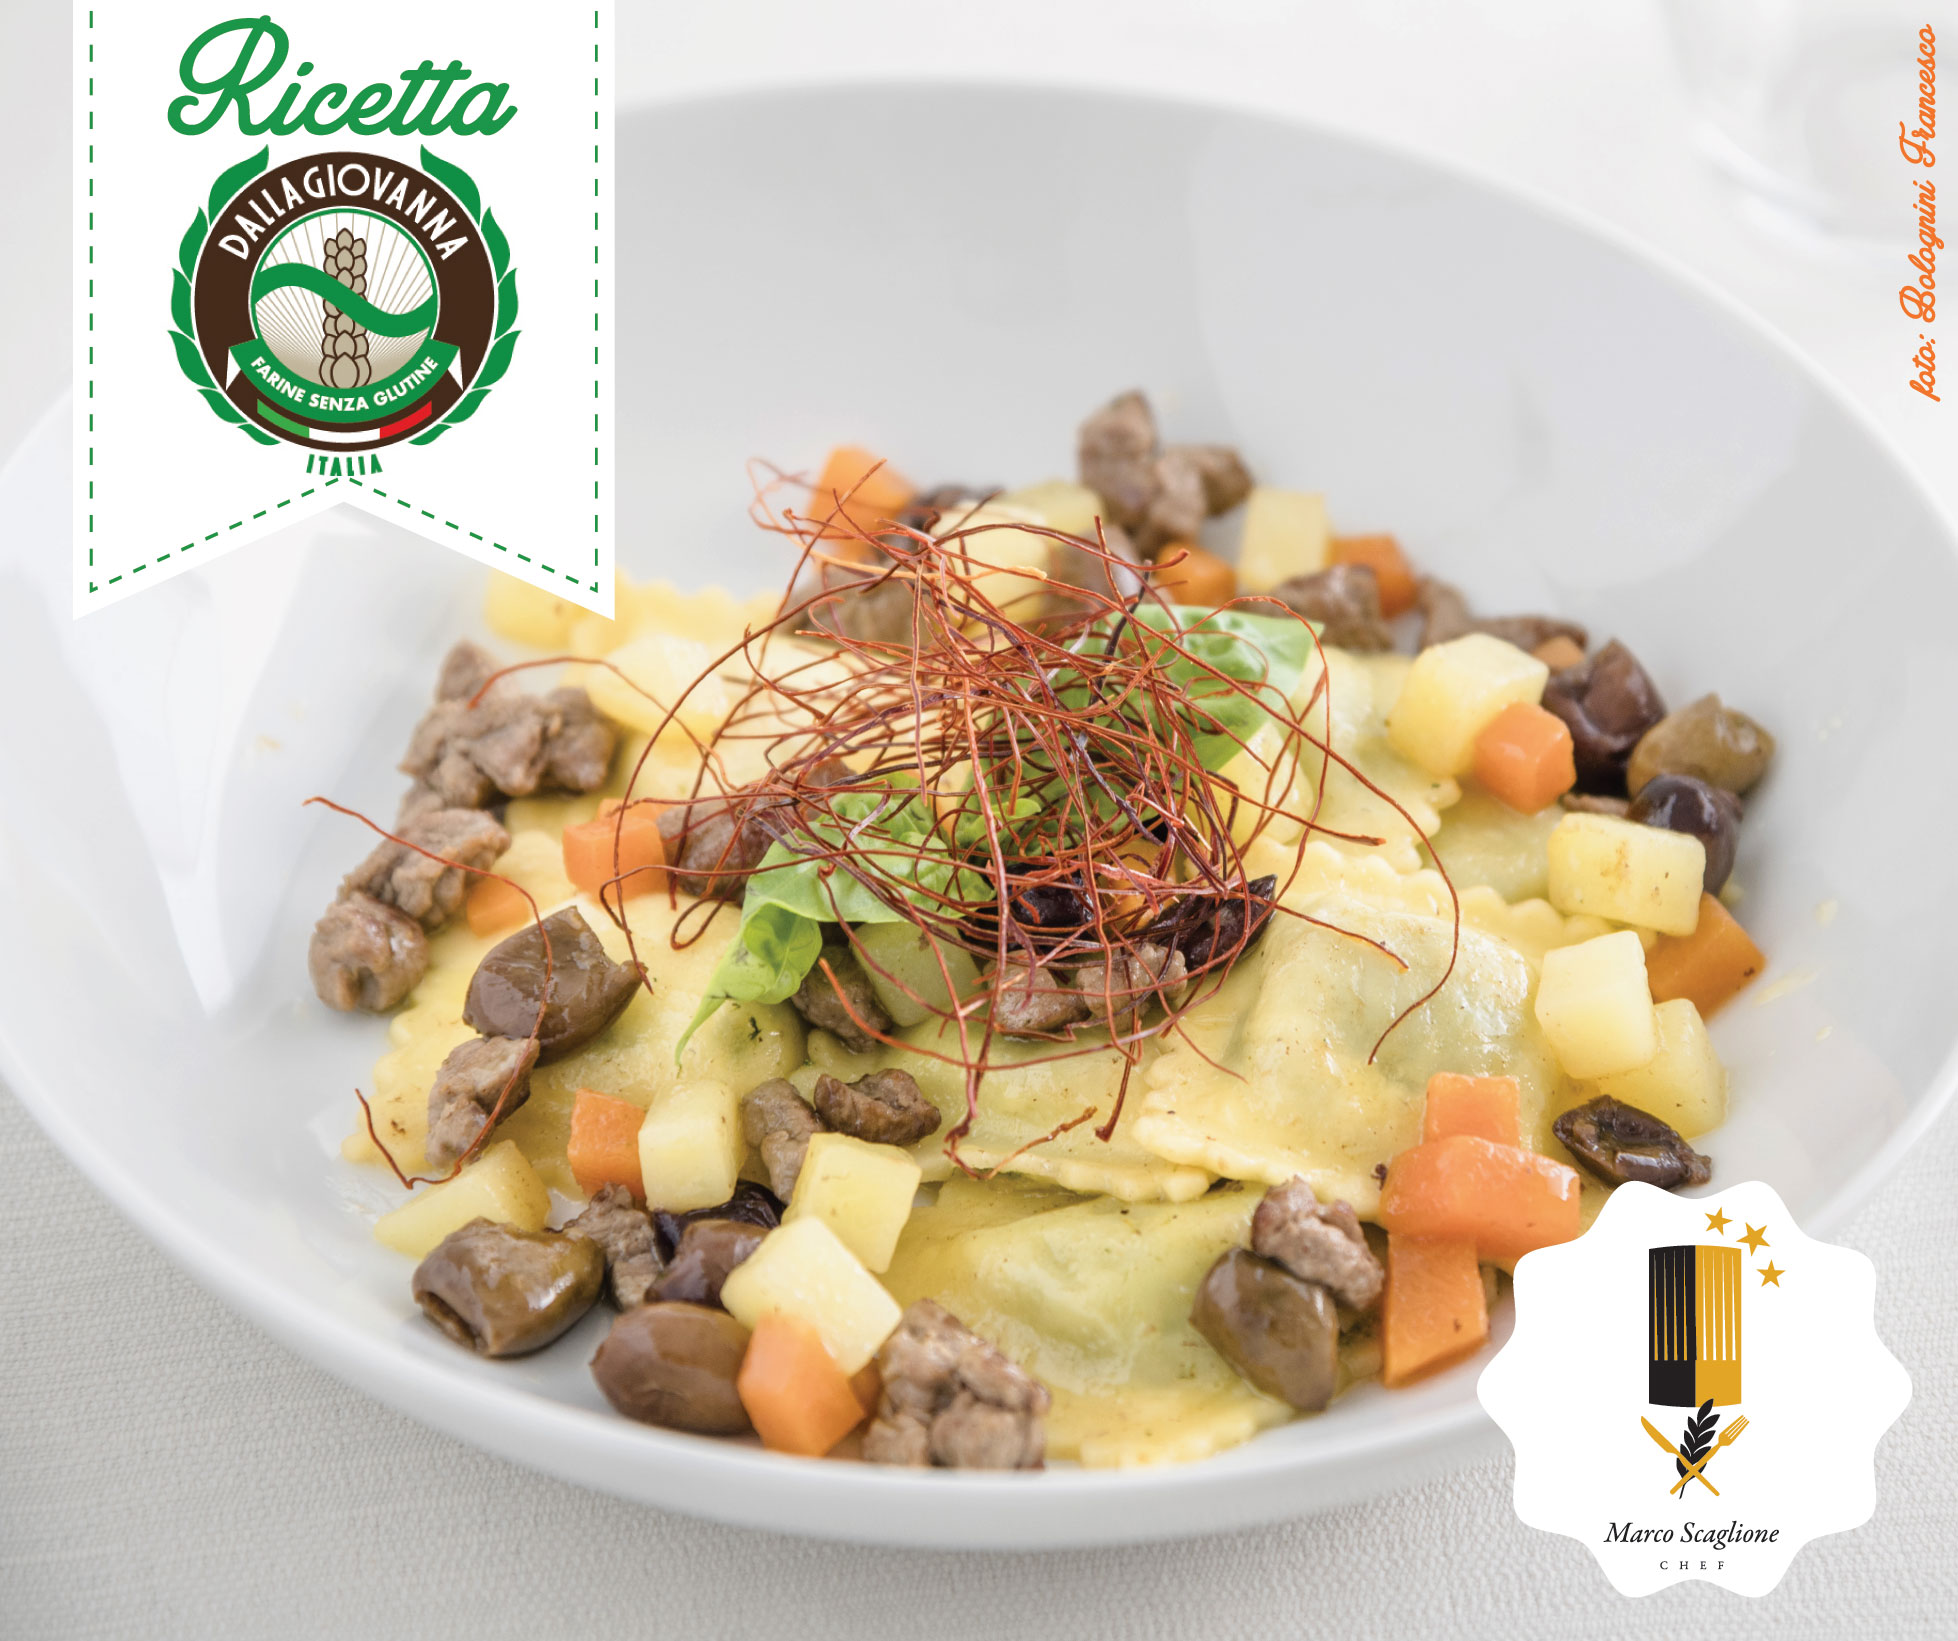 Gluten-free ravioli with ricotta and spinach with chopped beef with vegetables and taggiasca olives